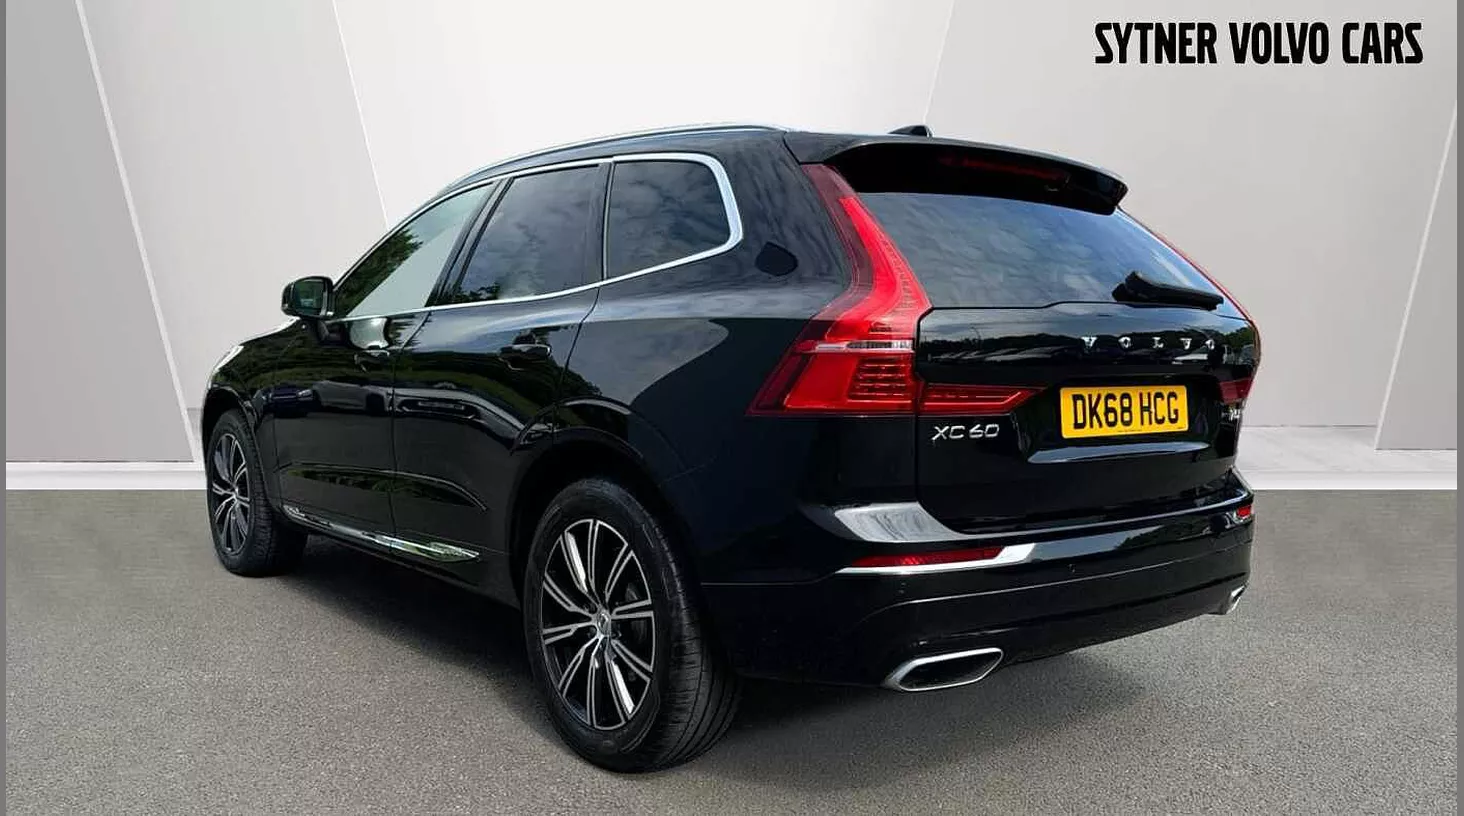 Volvo XC60 2.0 T5 [250] Inscription 5dr AWD Geartronic